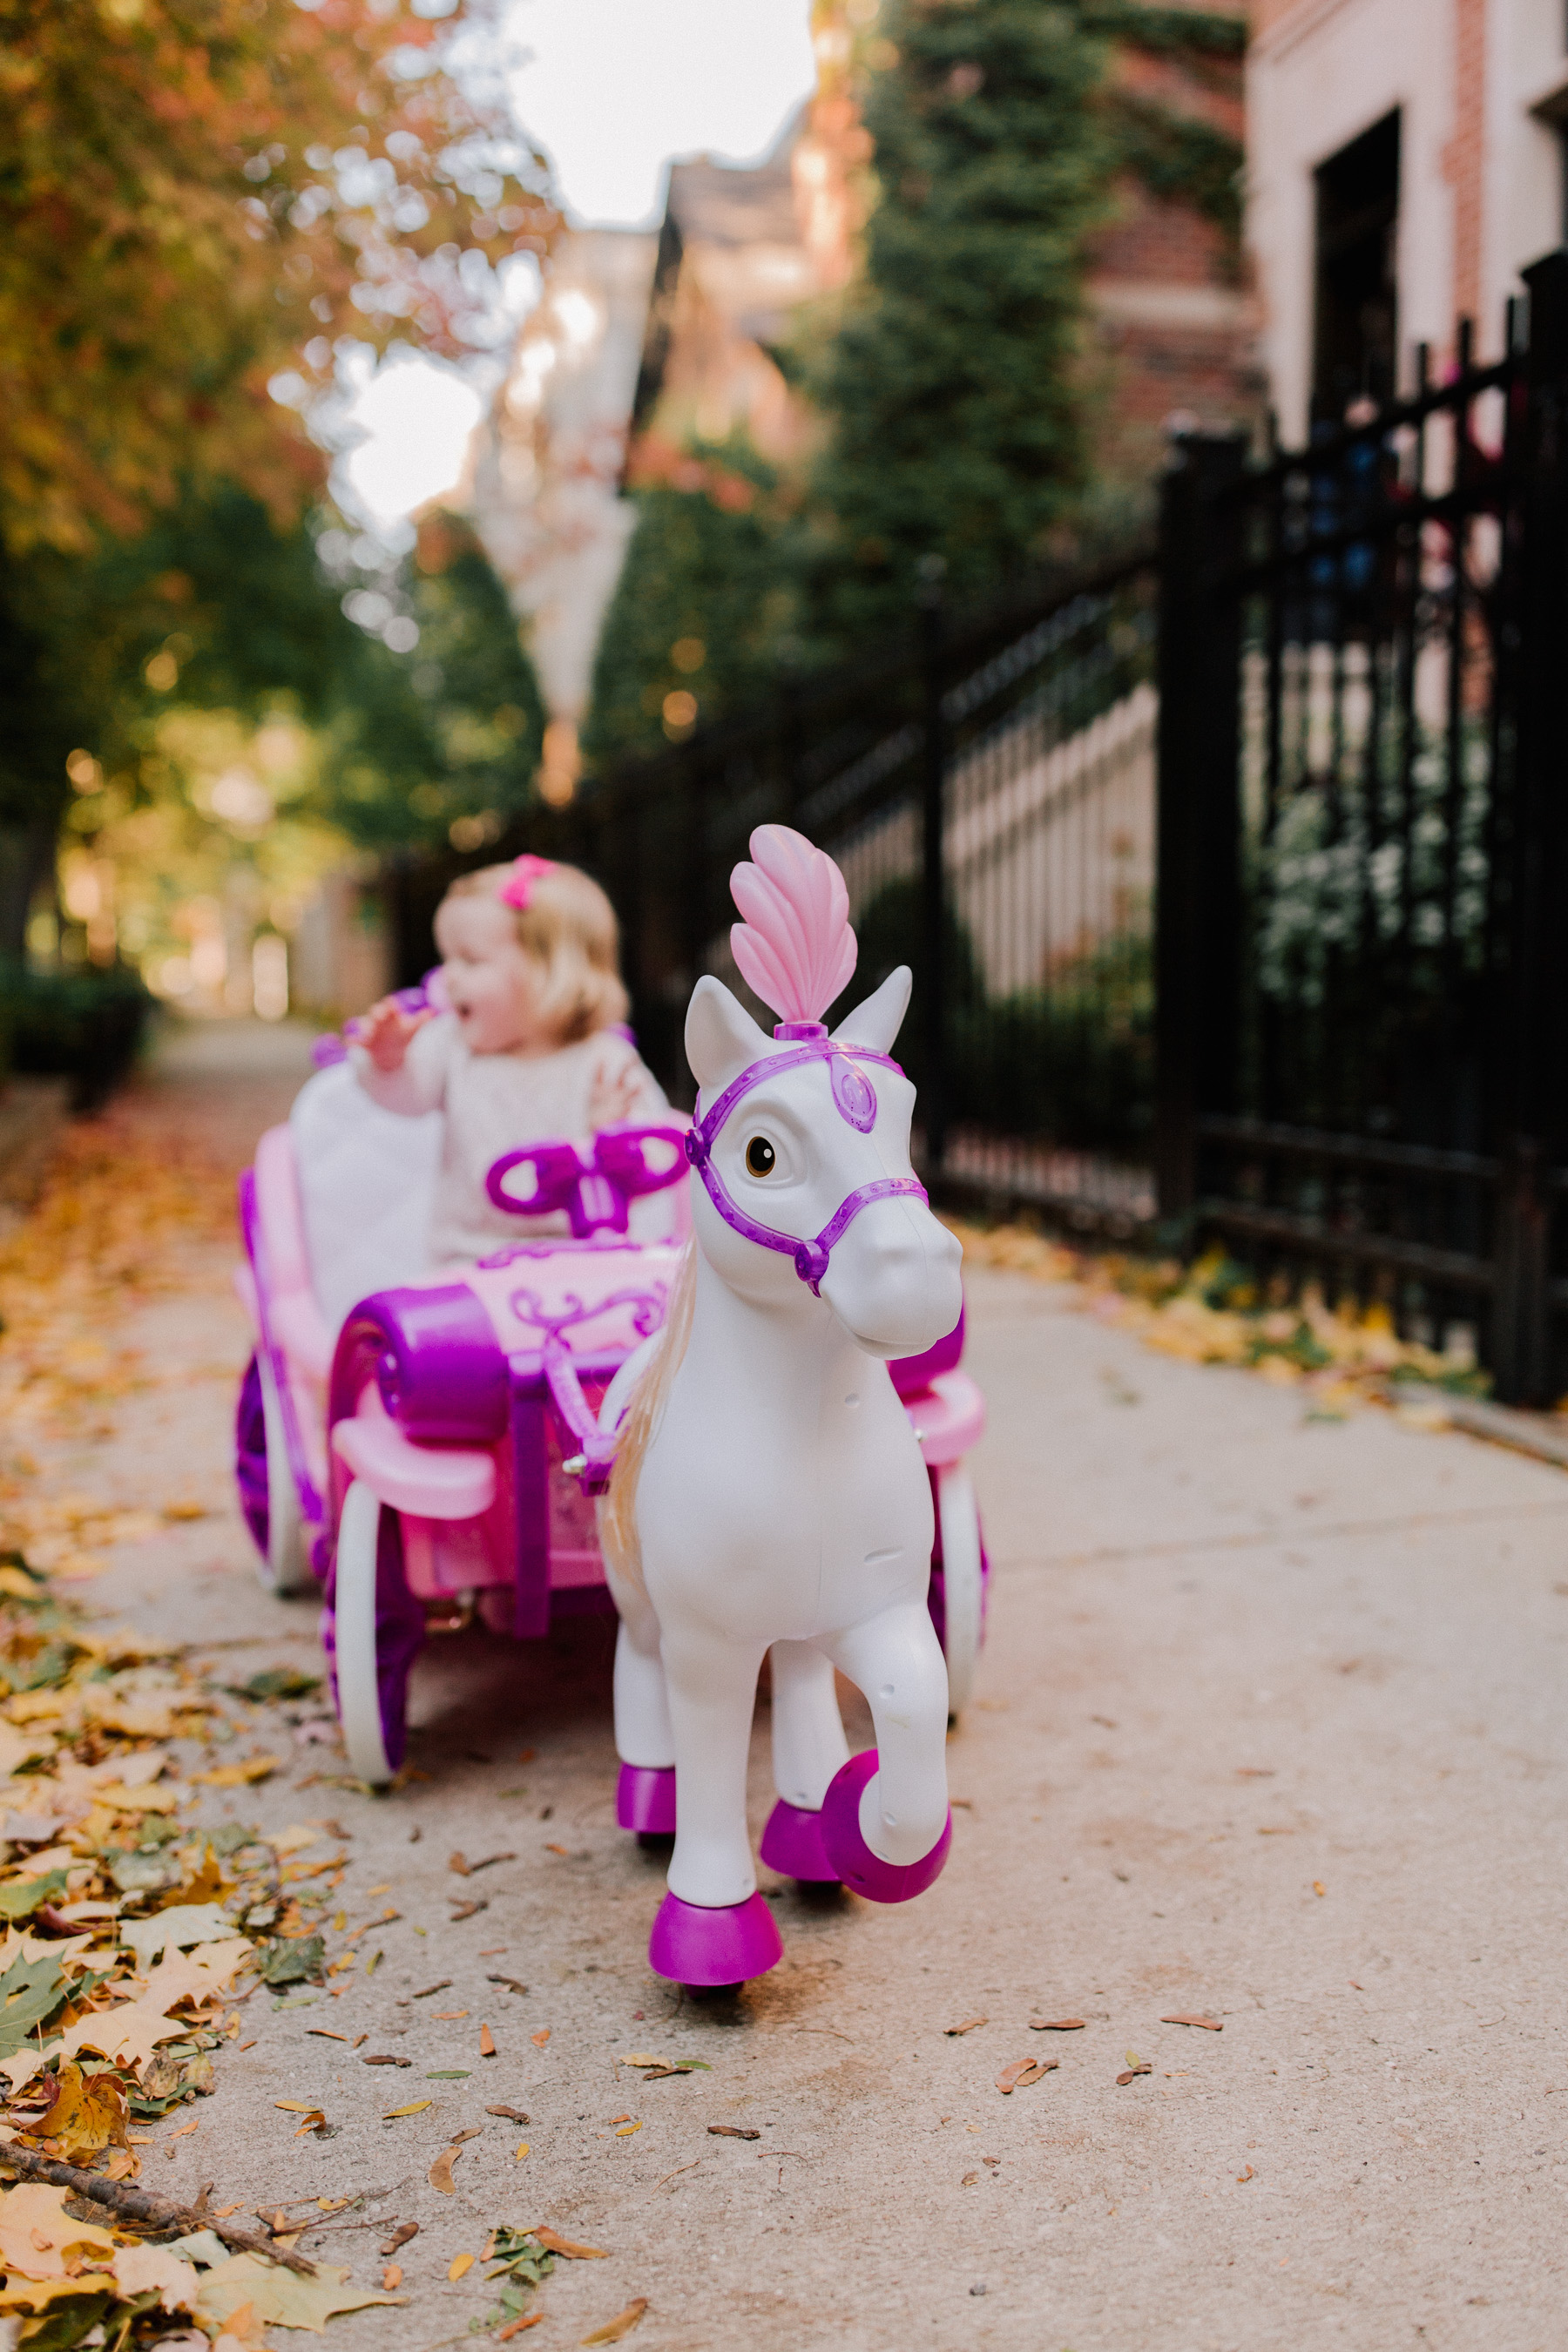 Disney Princess Royal Horse and Carriage Girls 6V Ride-On Toy by Huffy